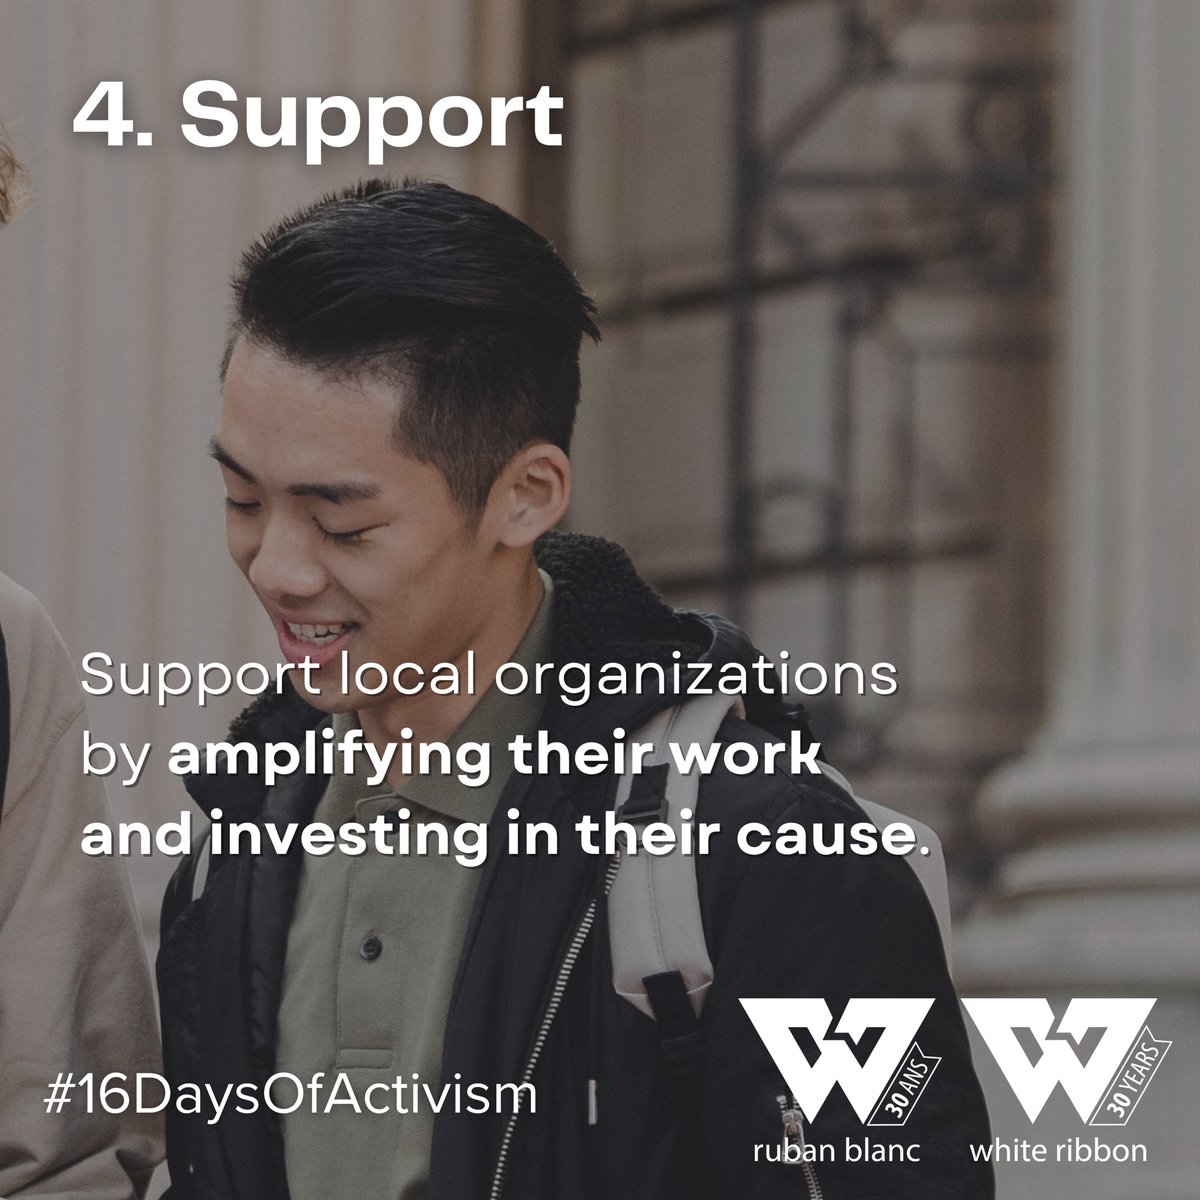 Today is the International Day for the Elimination of Violence Against Women and the beginning of #16DaysOfActivism. We call on men, boys, and all allies to demonstrate their solidarity and allyship. Here are four things you can do: